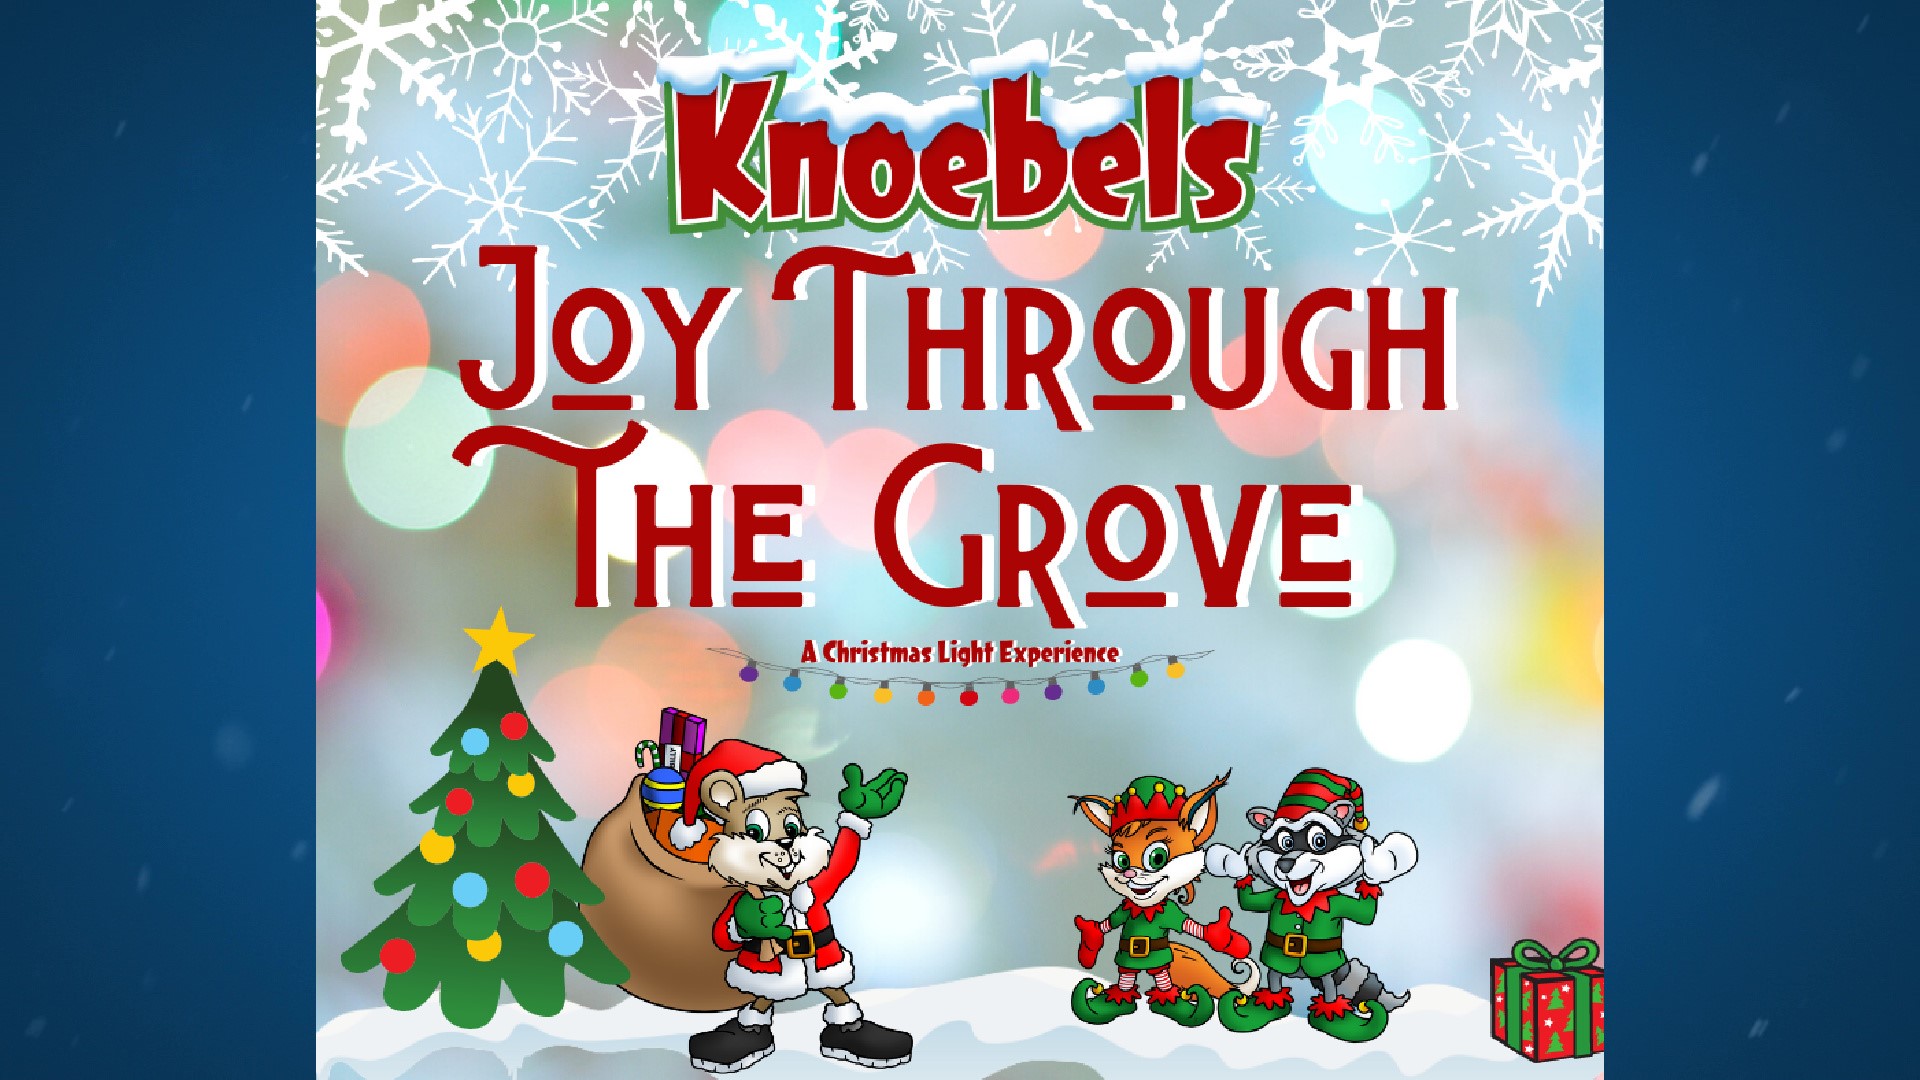 A drive-thru light display is in the works for Knoebels Amusement Resort.